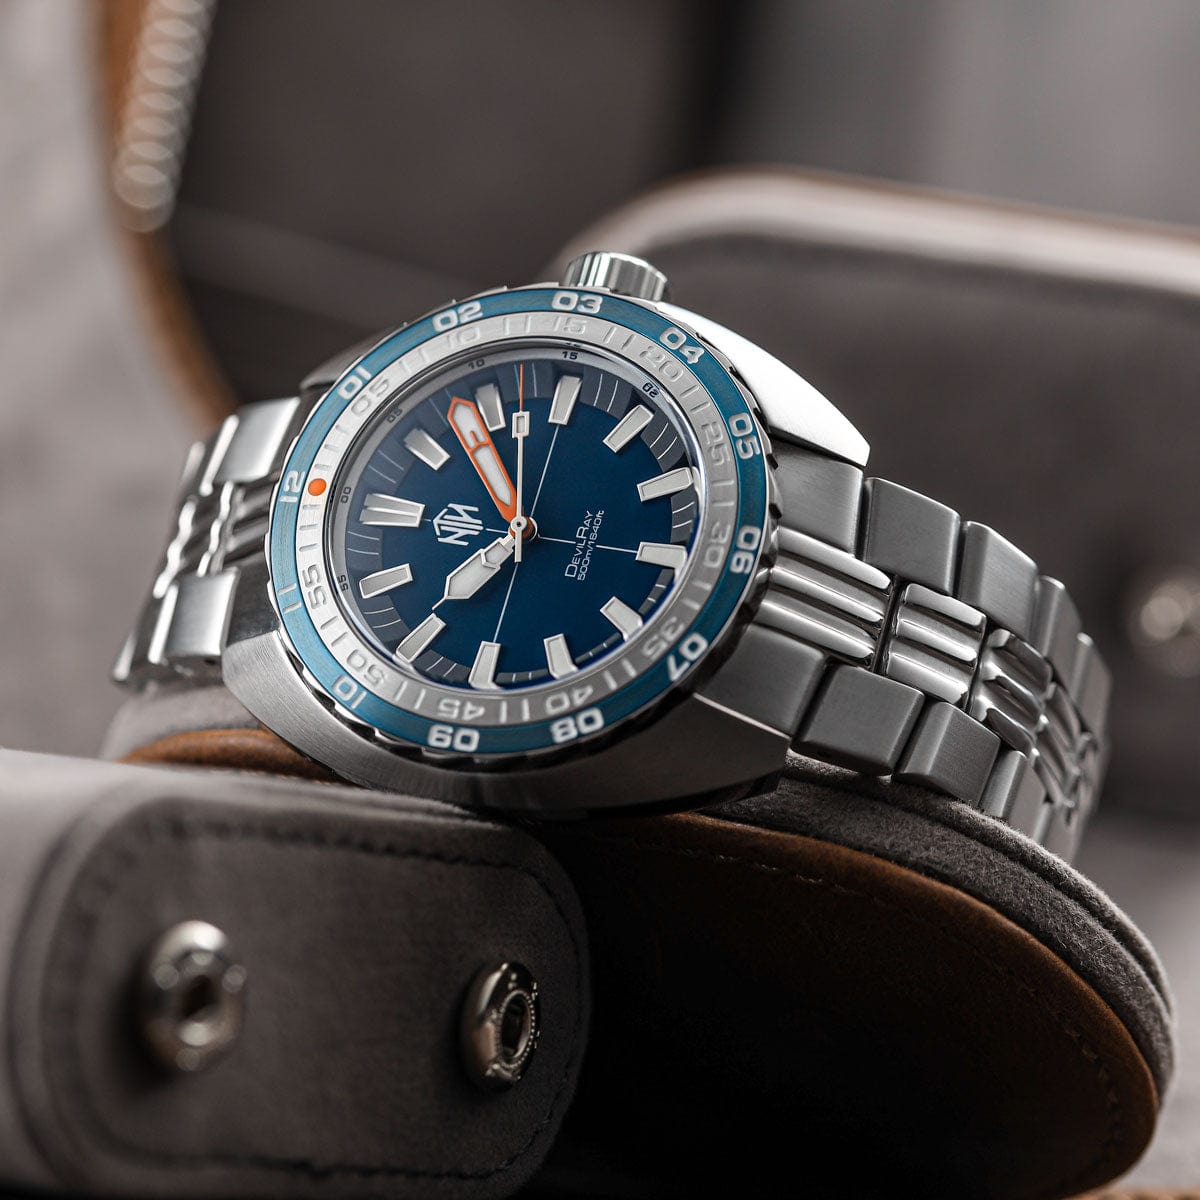 NTH DevilRay Dive Watch - Blue - WatchGecko Exclusive - Nearly New